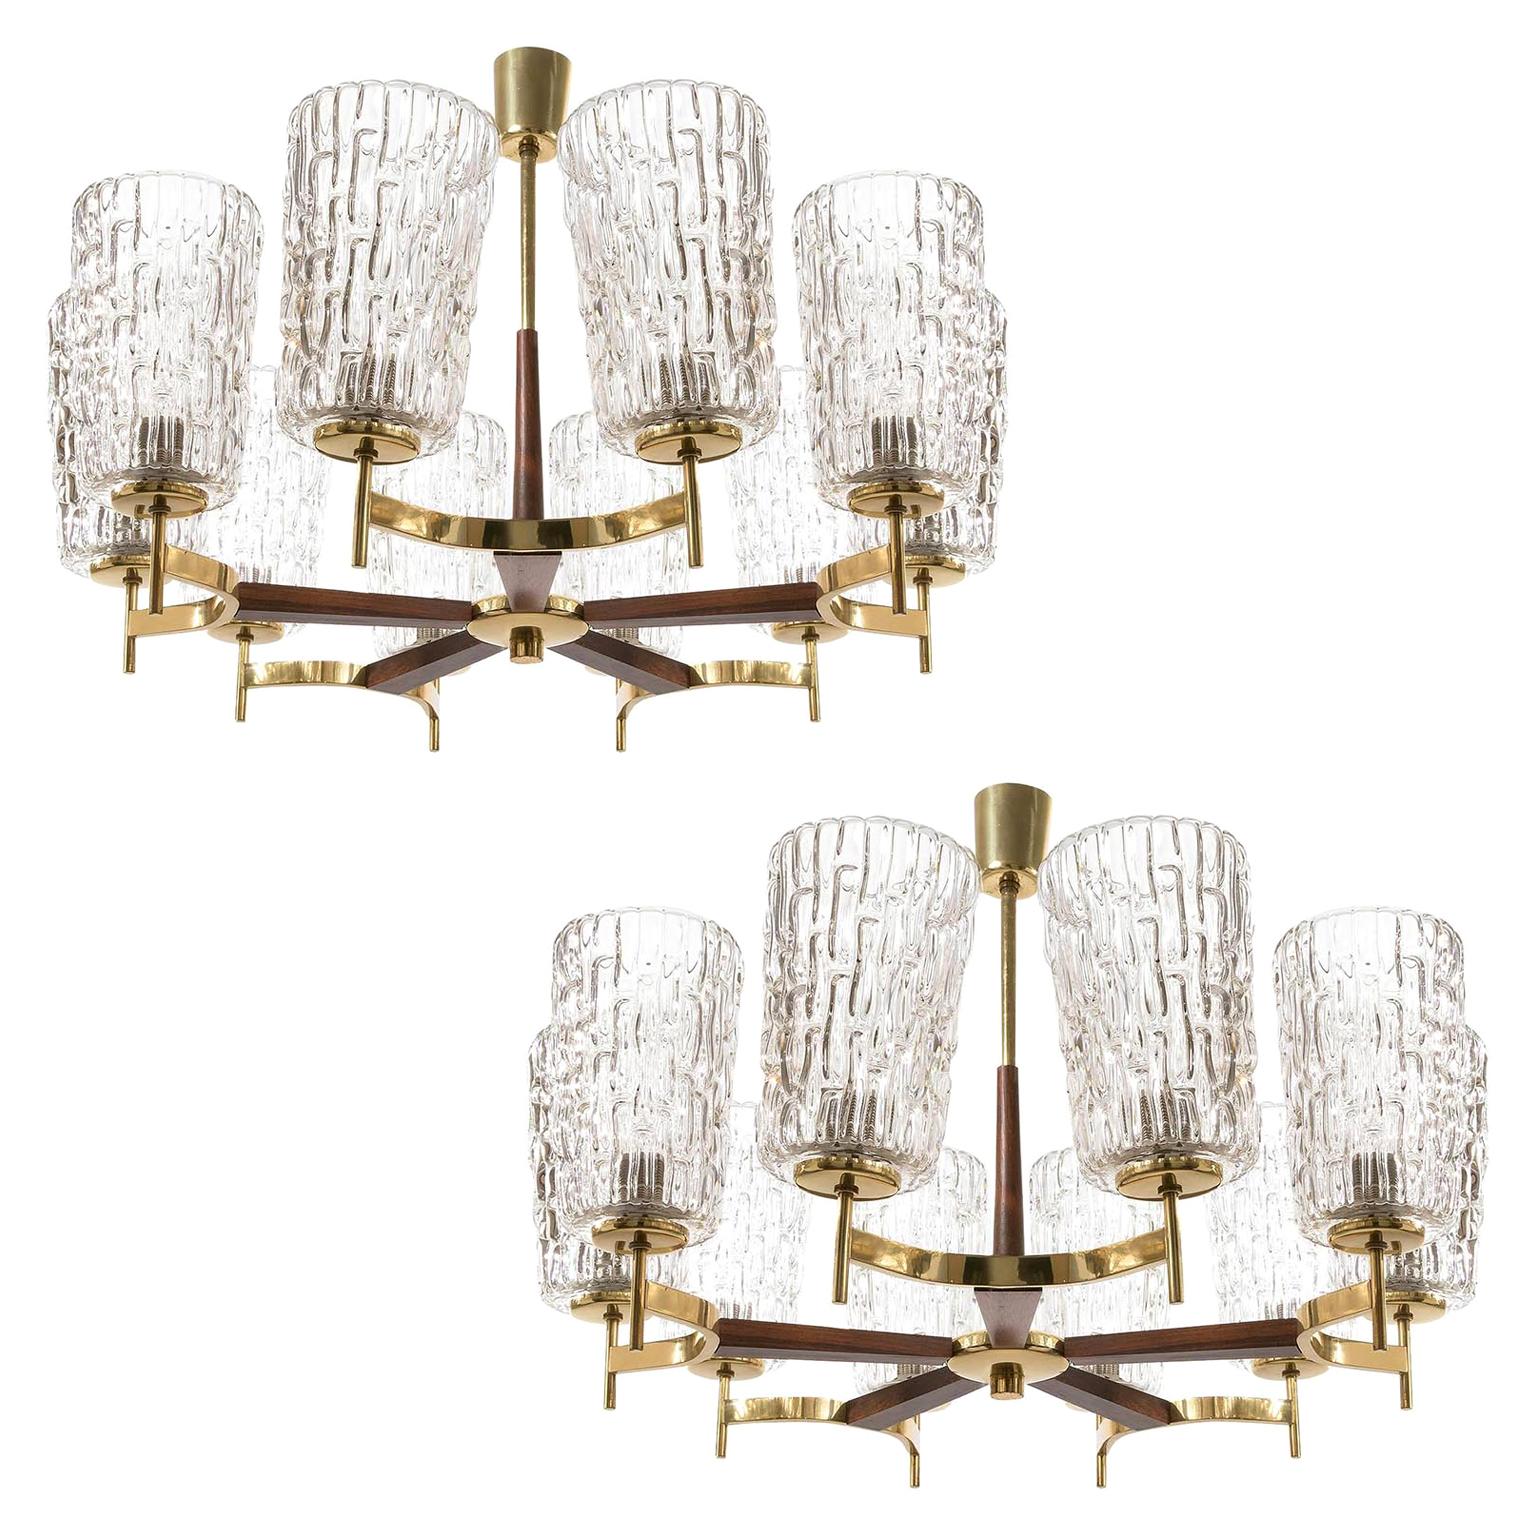 Two Large Chandeliers by Rupert Nikoll, Brass Wood and Glass, Austria, 1960